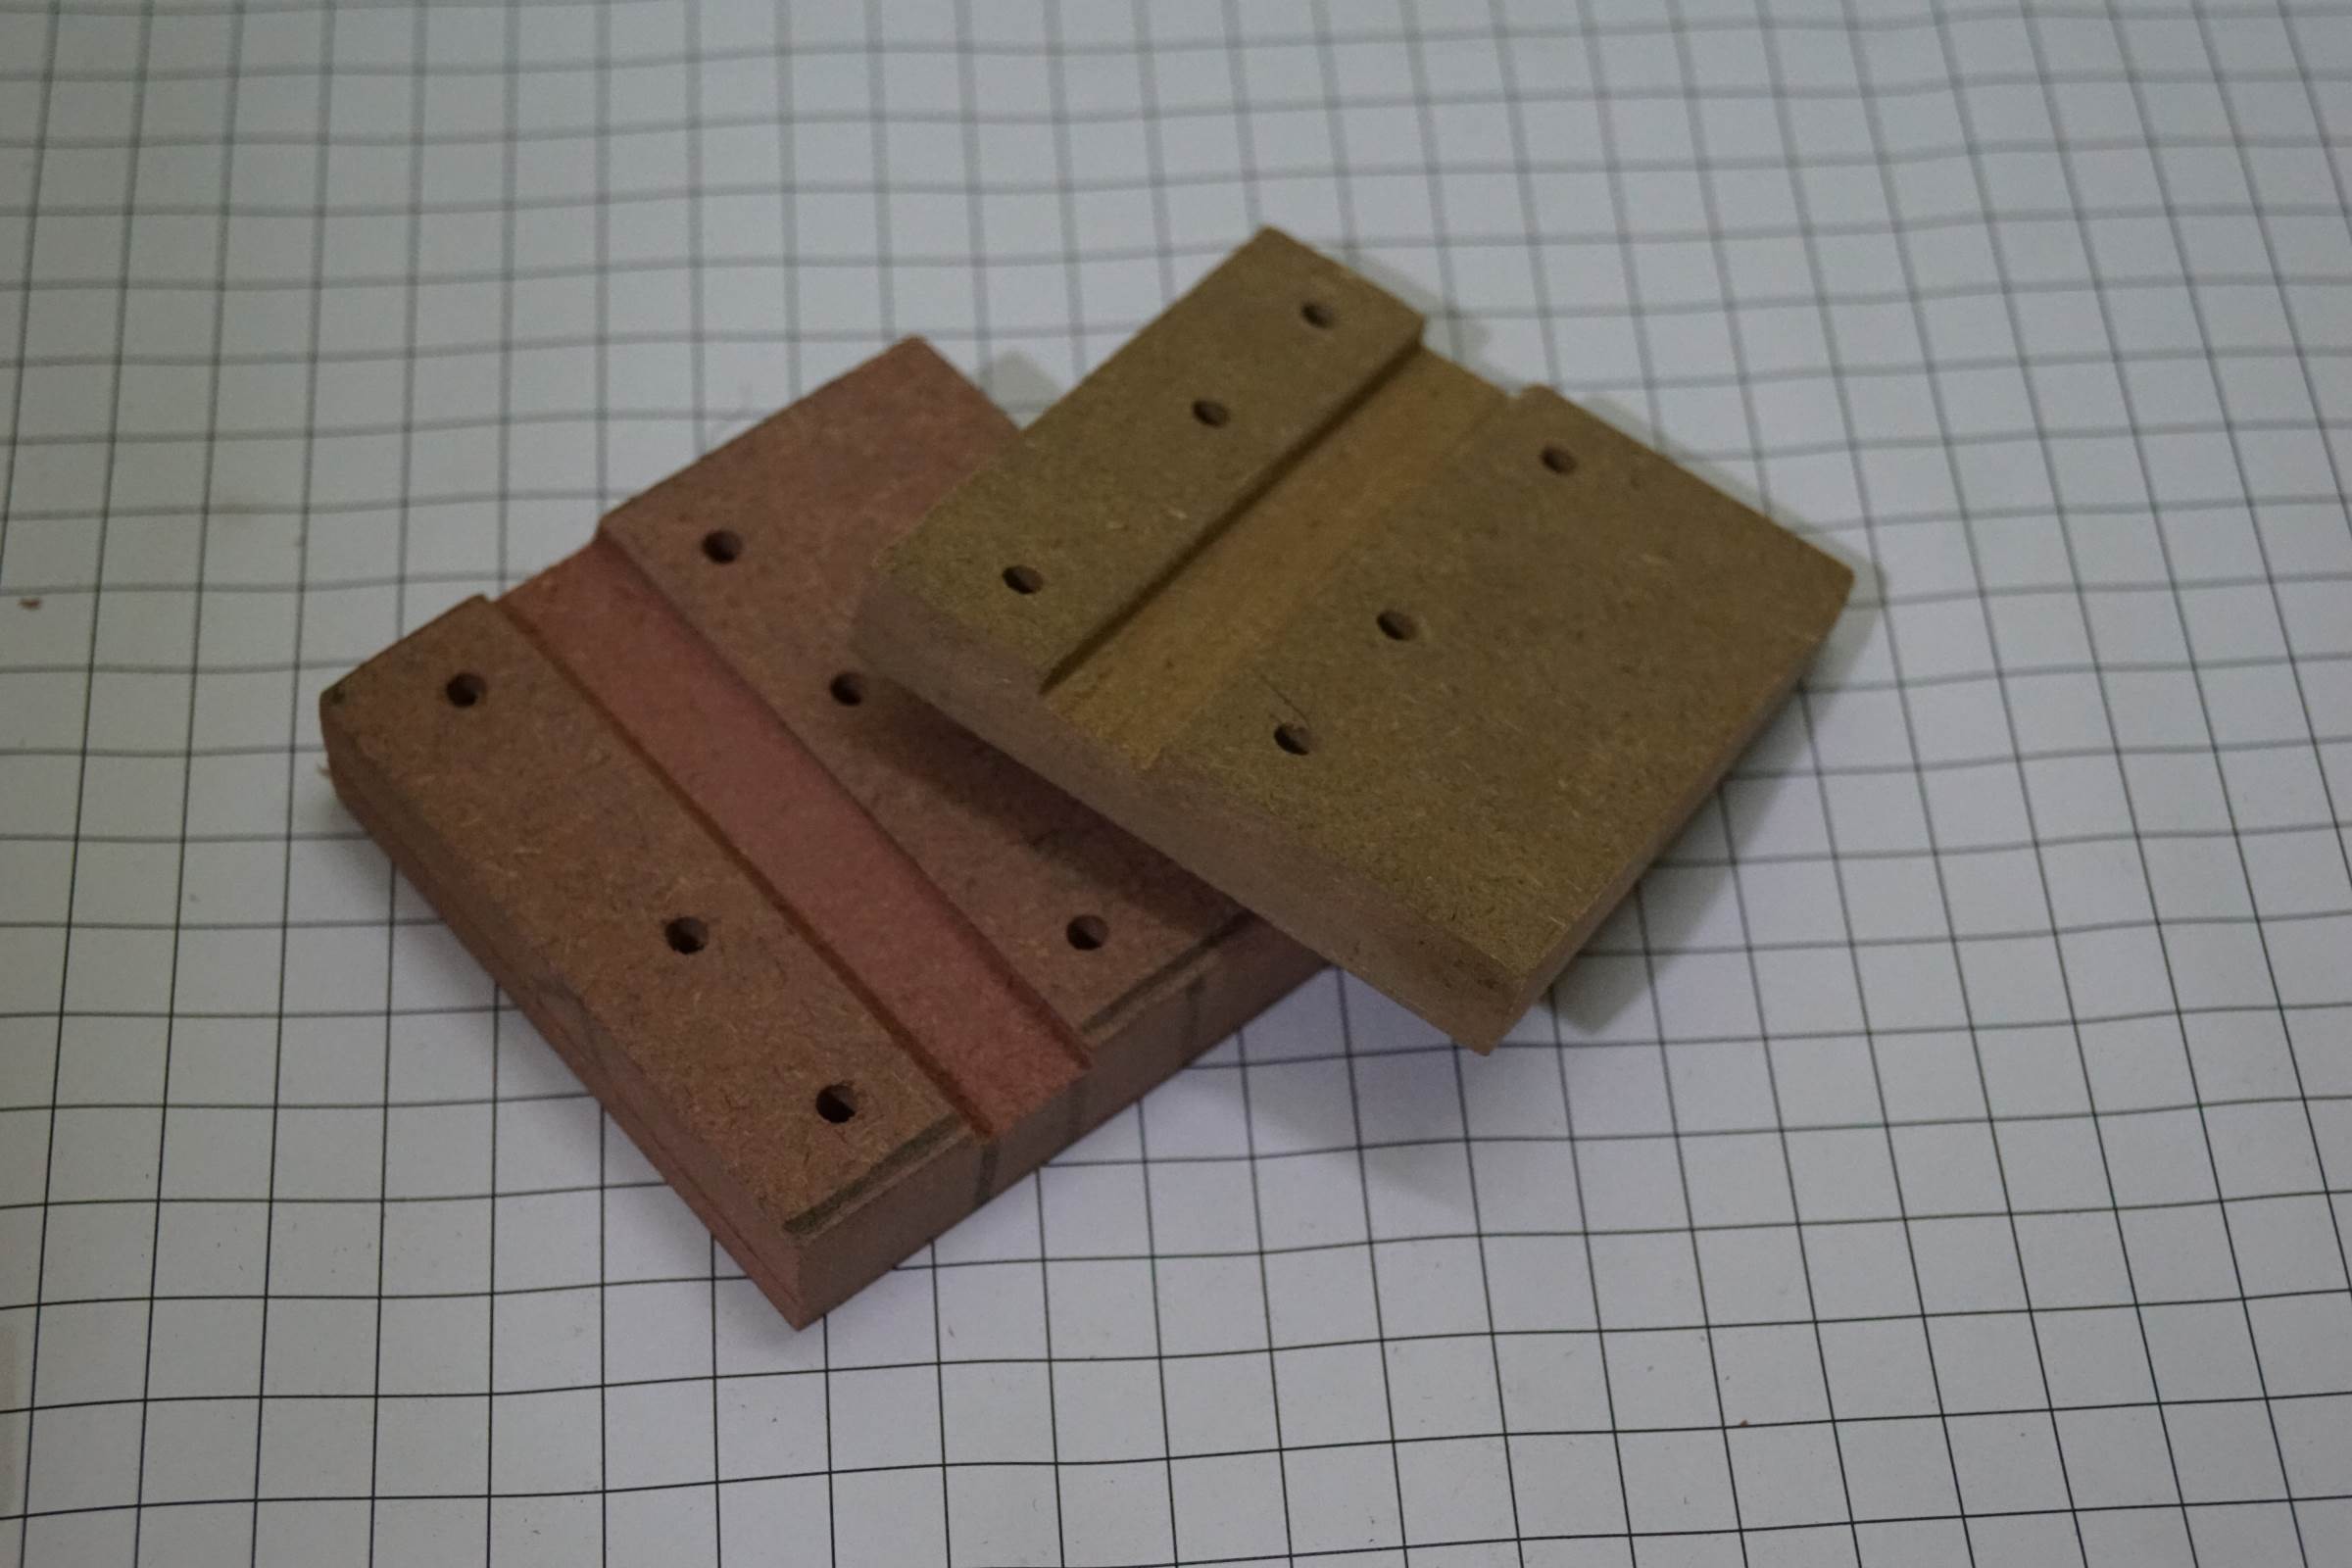 X-Axis End Plates with a depression to support the LM10UU Linear Bearing of Y-Axis